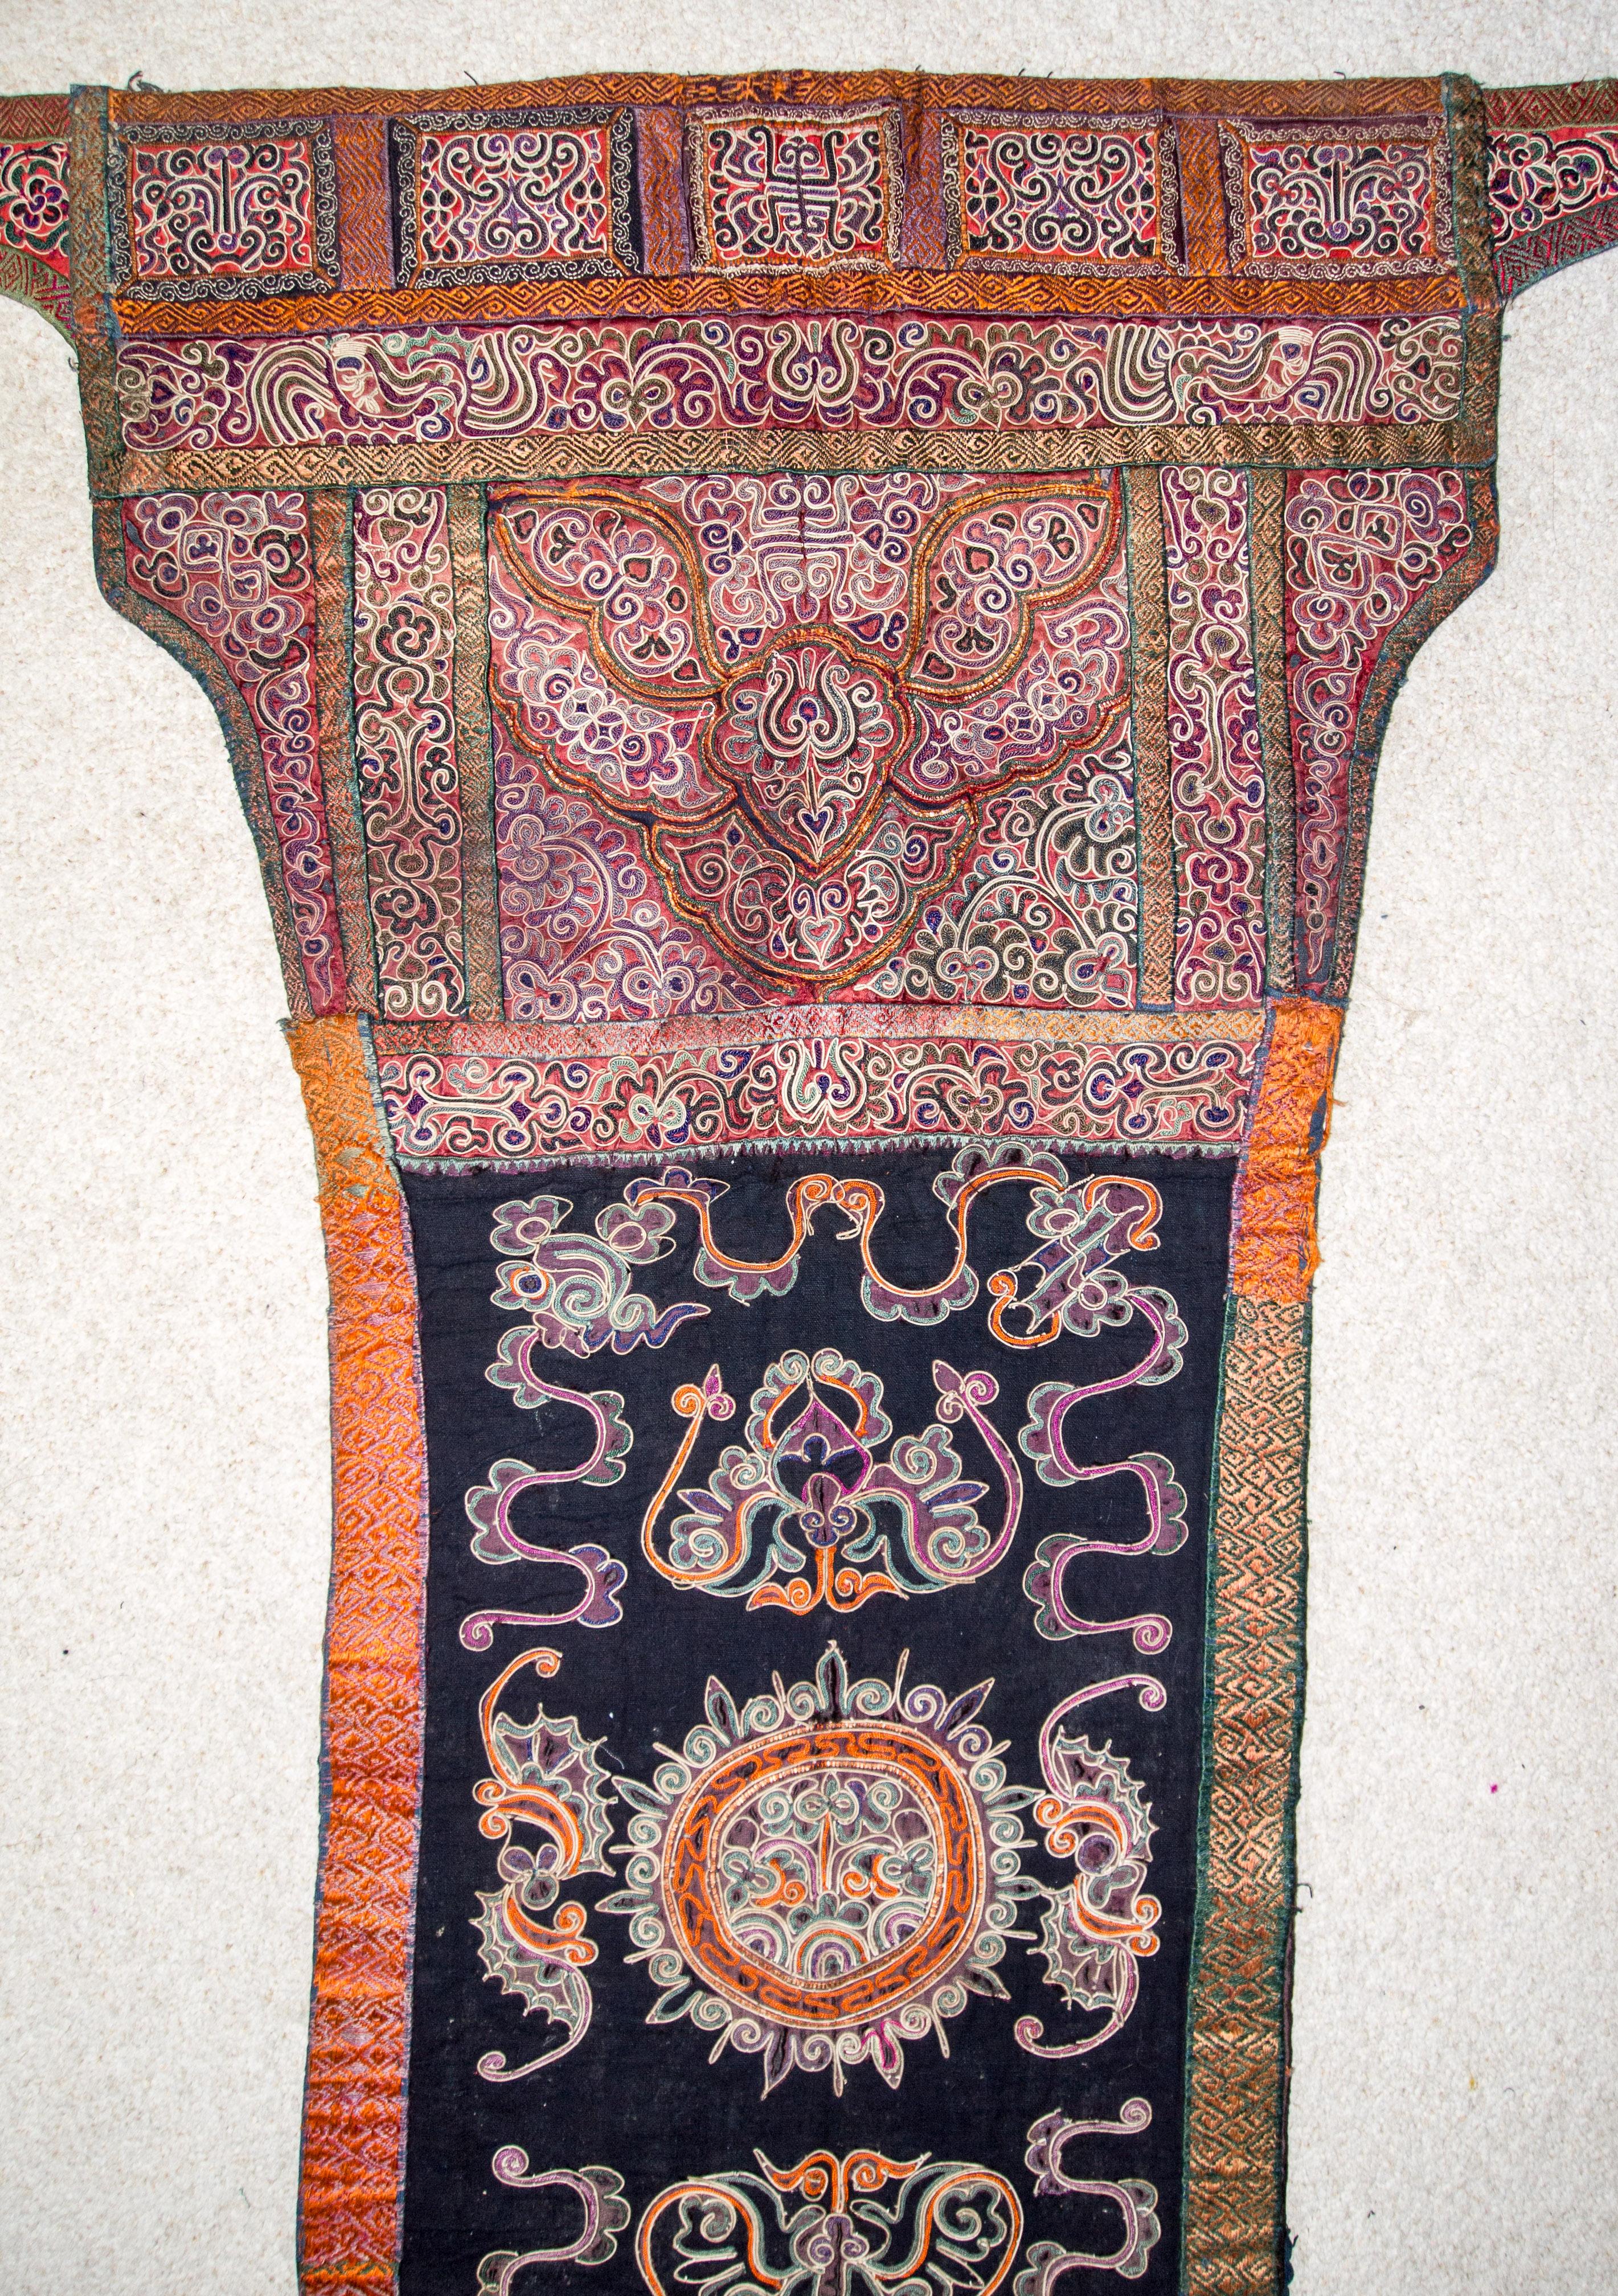 Early 20th century Baby Carrier, Shui Ethnic Minority. Guizhou, China. Incorporating horse hair embroidery.
This baby carrier comes from the Shui people of Sandu District in southern Guizhou. It exhibits a variety of embroidery and applique